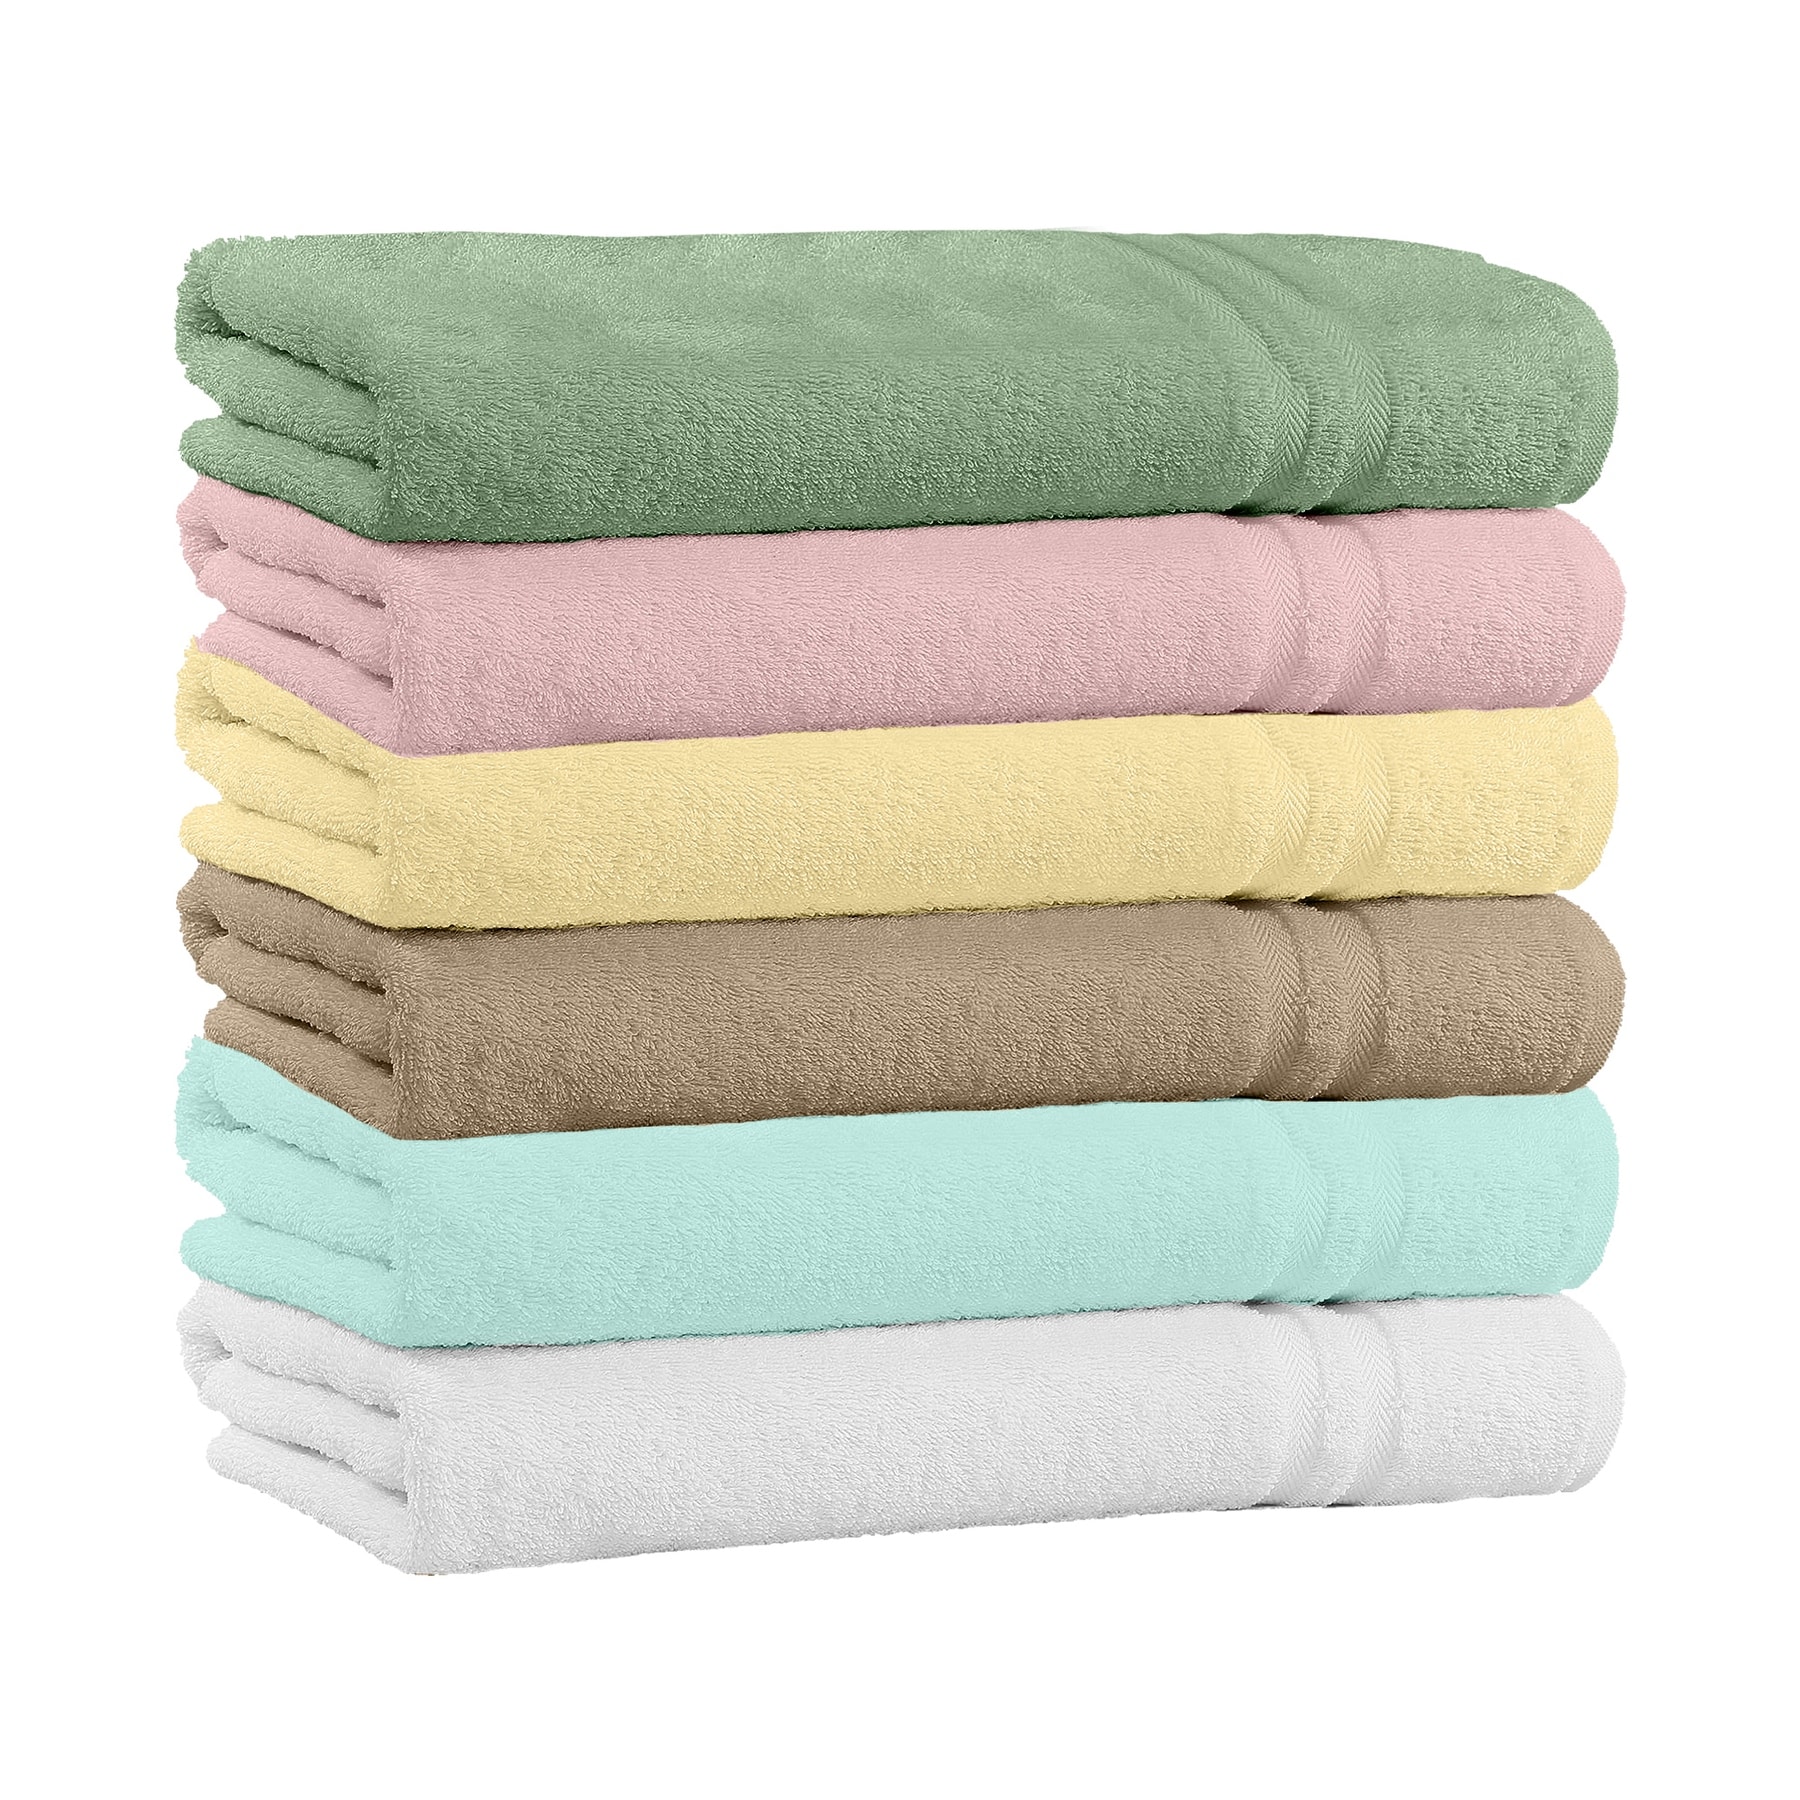 DKNY Quick Dry 100% Cotton Towels, 6 Pack Washcloths - 12 x12, Linen